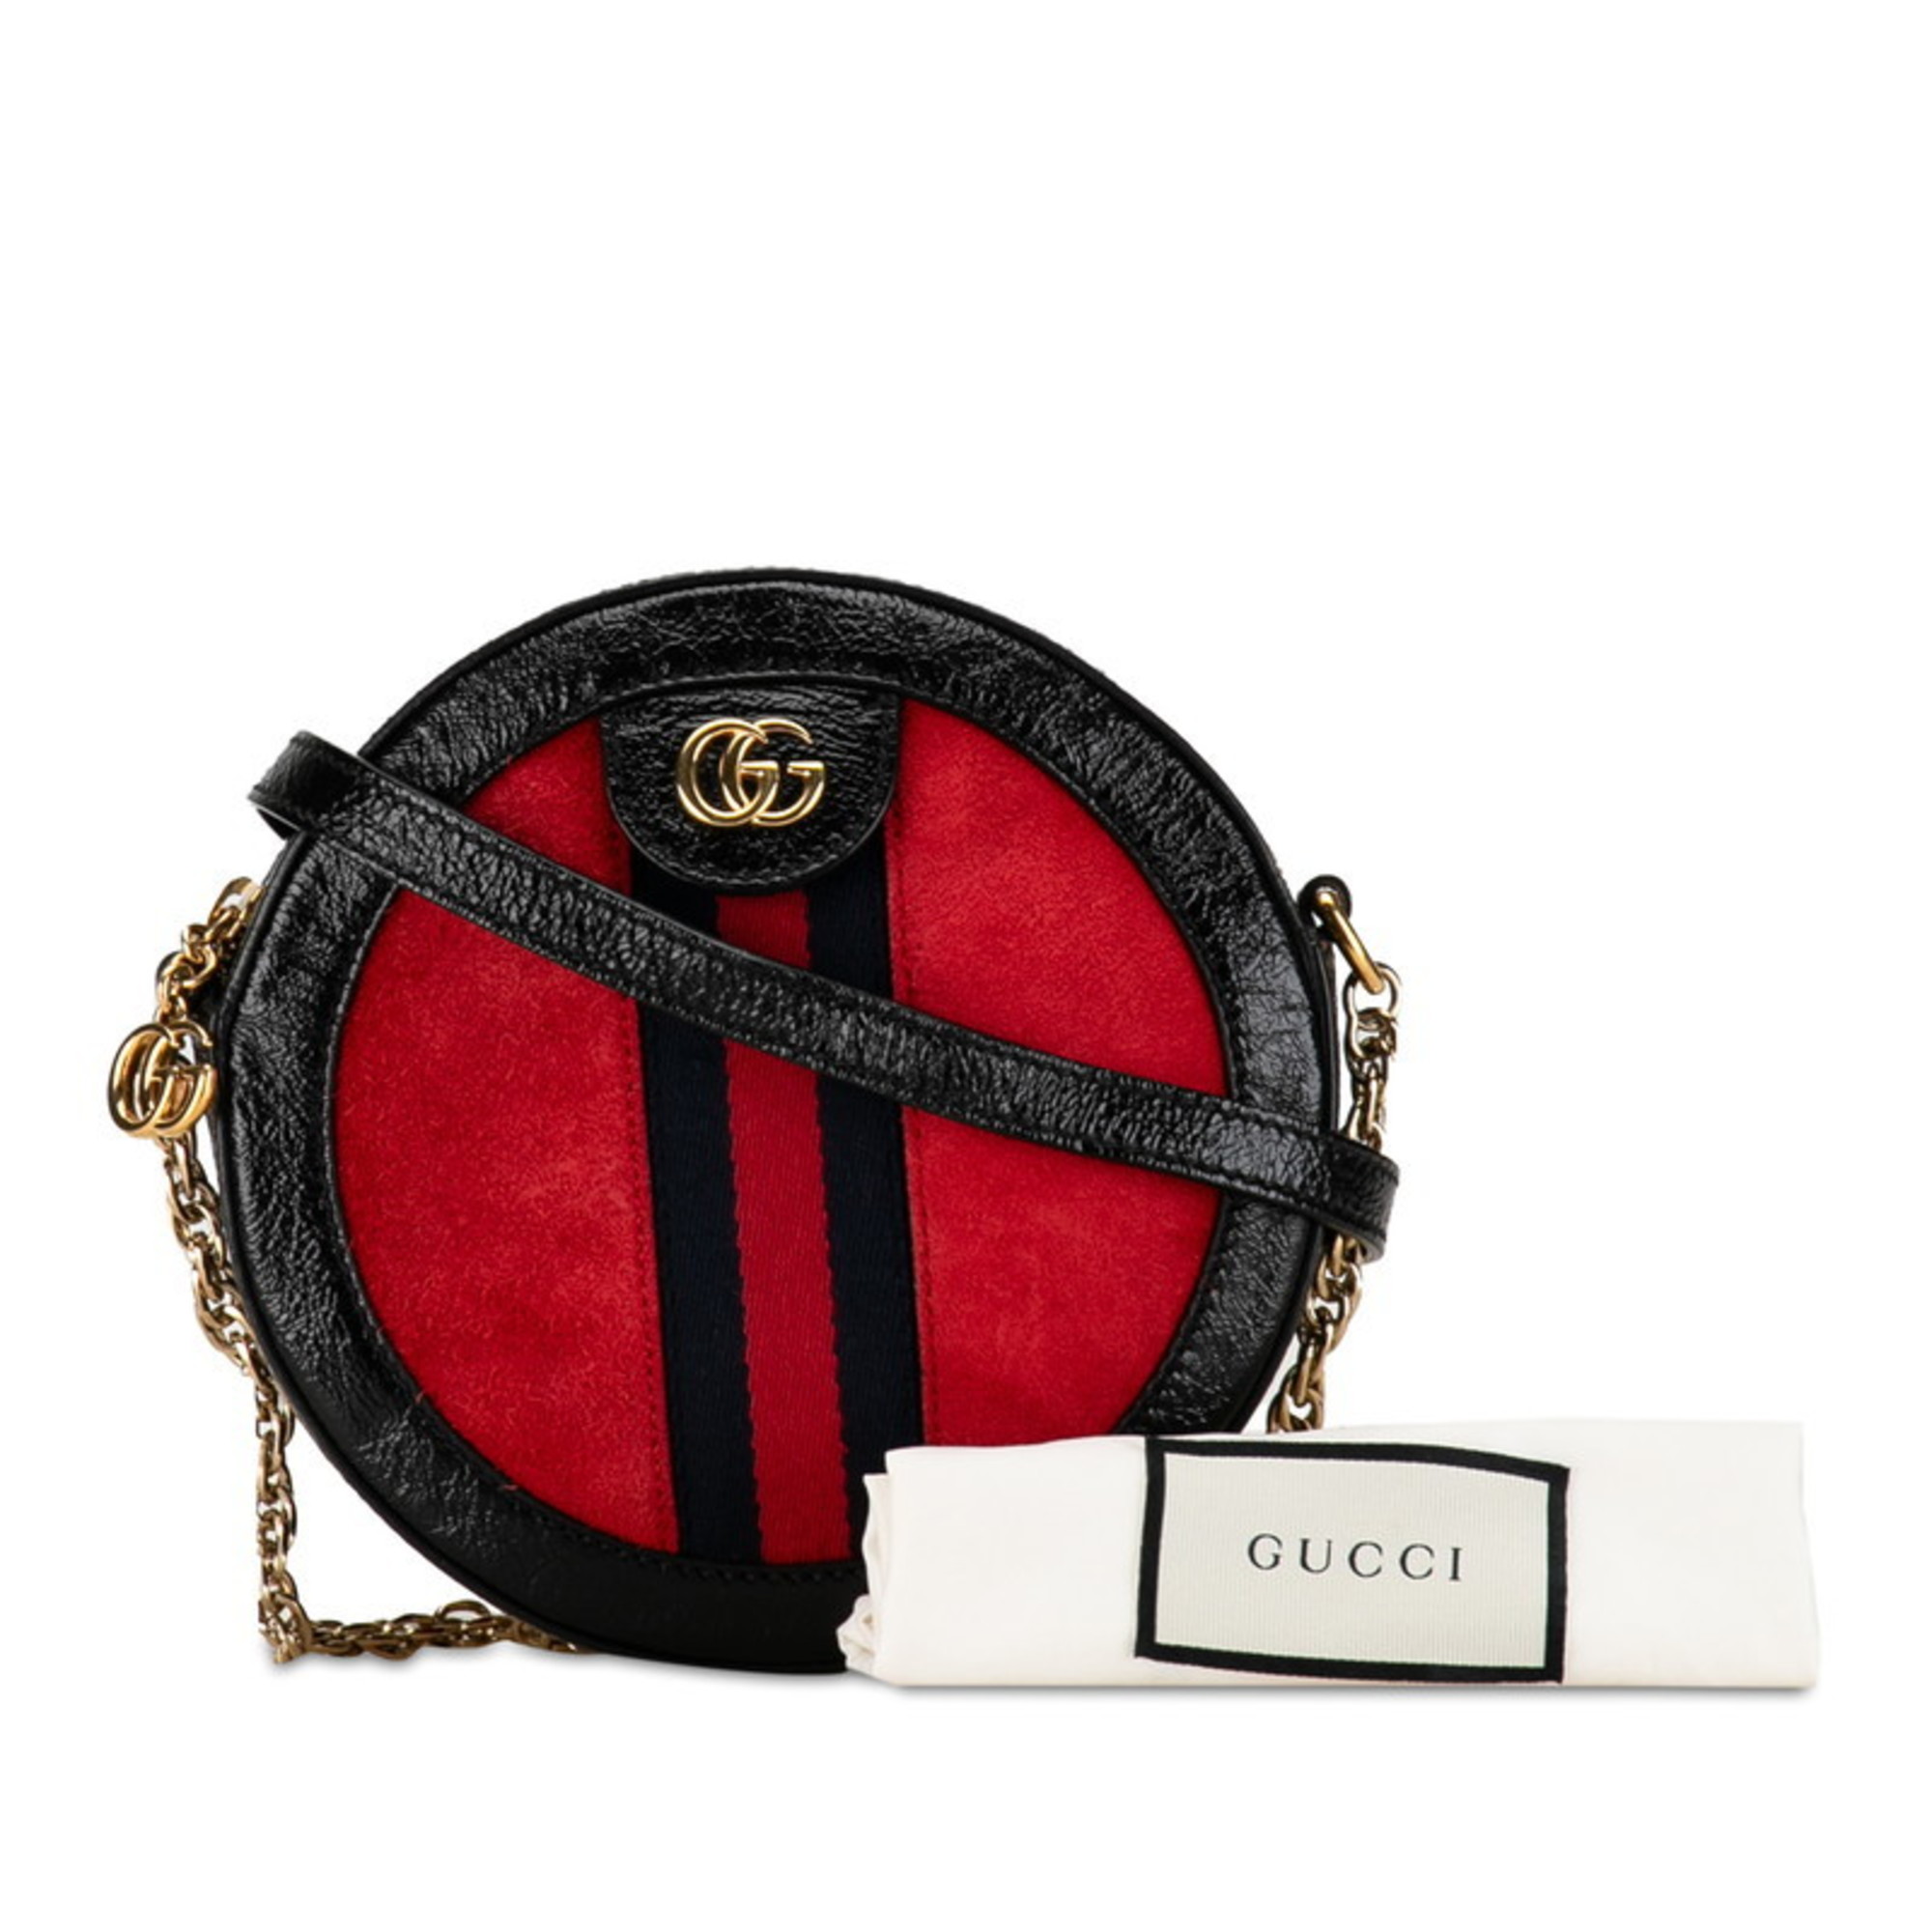 Gucci Ophidia GG Marmont Round Chain Shoulder Bag 550618 Black Red Patent Leather Suede Women's GUCCI